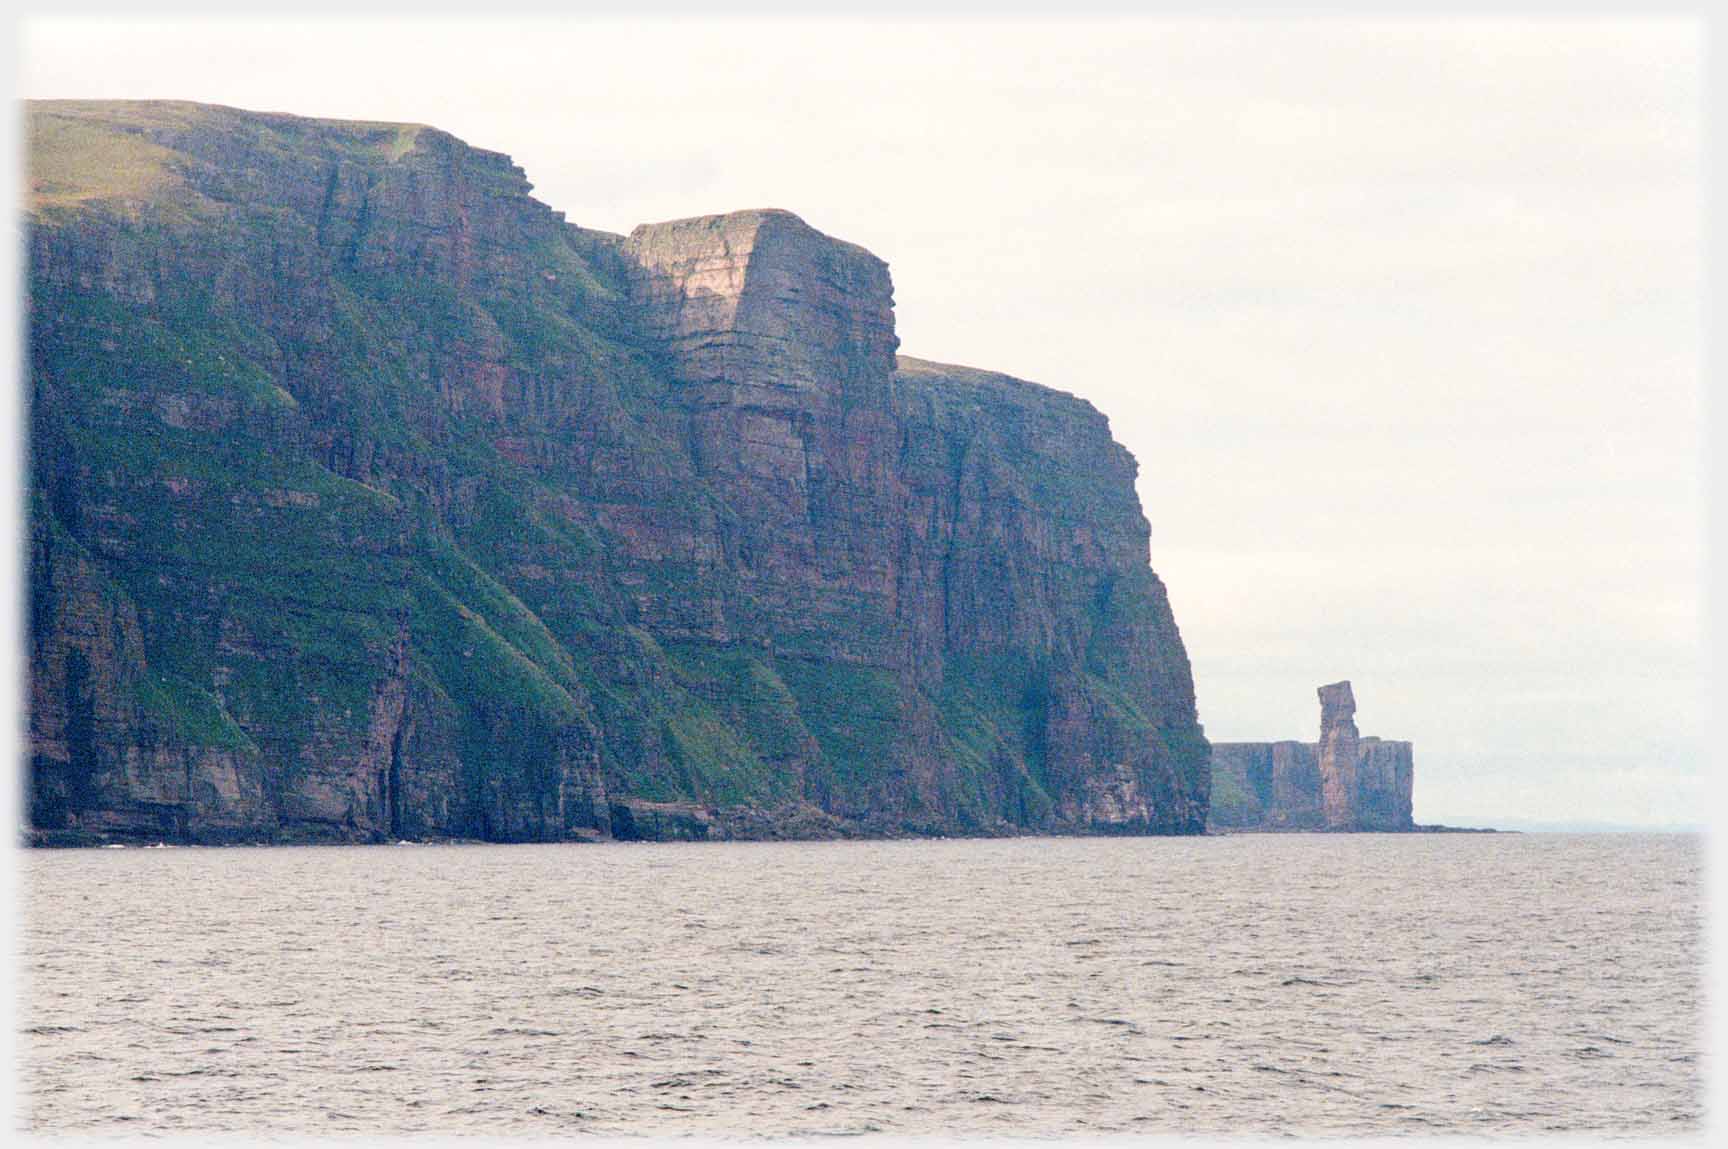 A closer view of the bastion and the Old Man of Hoy.